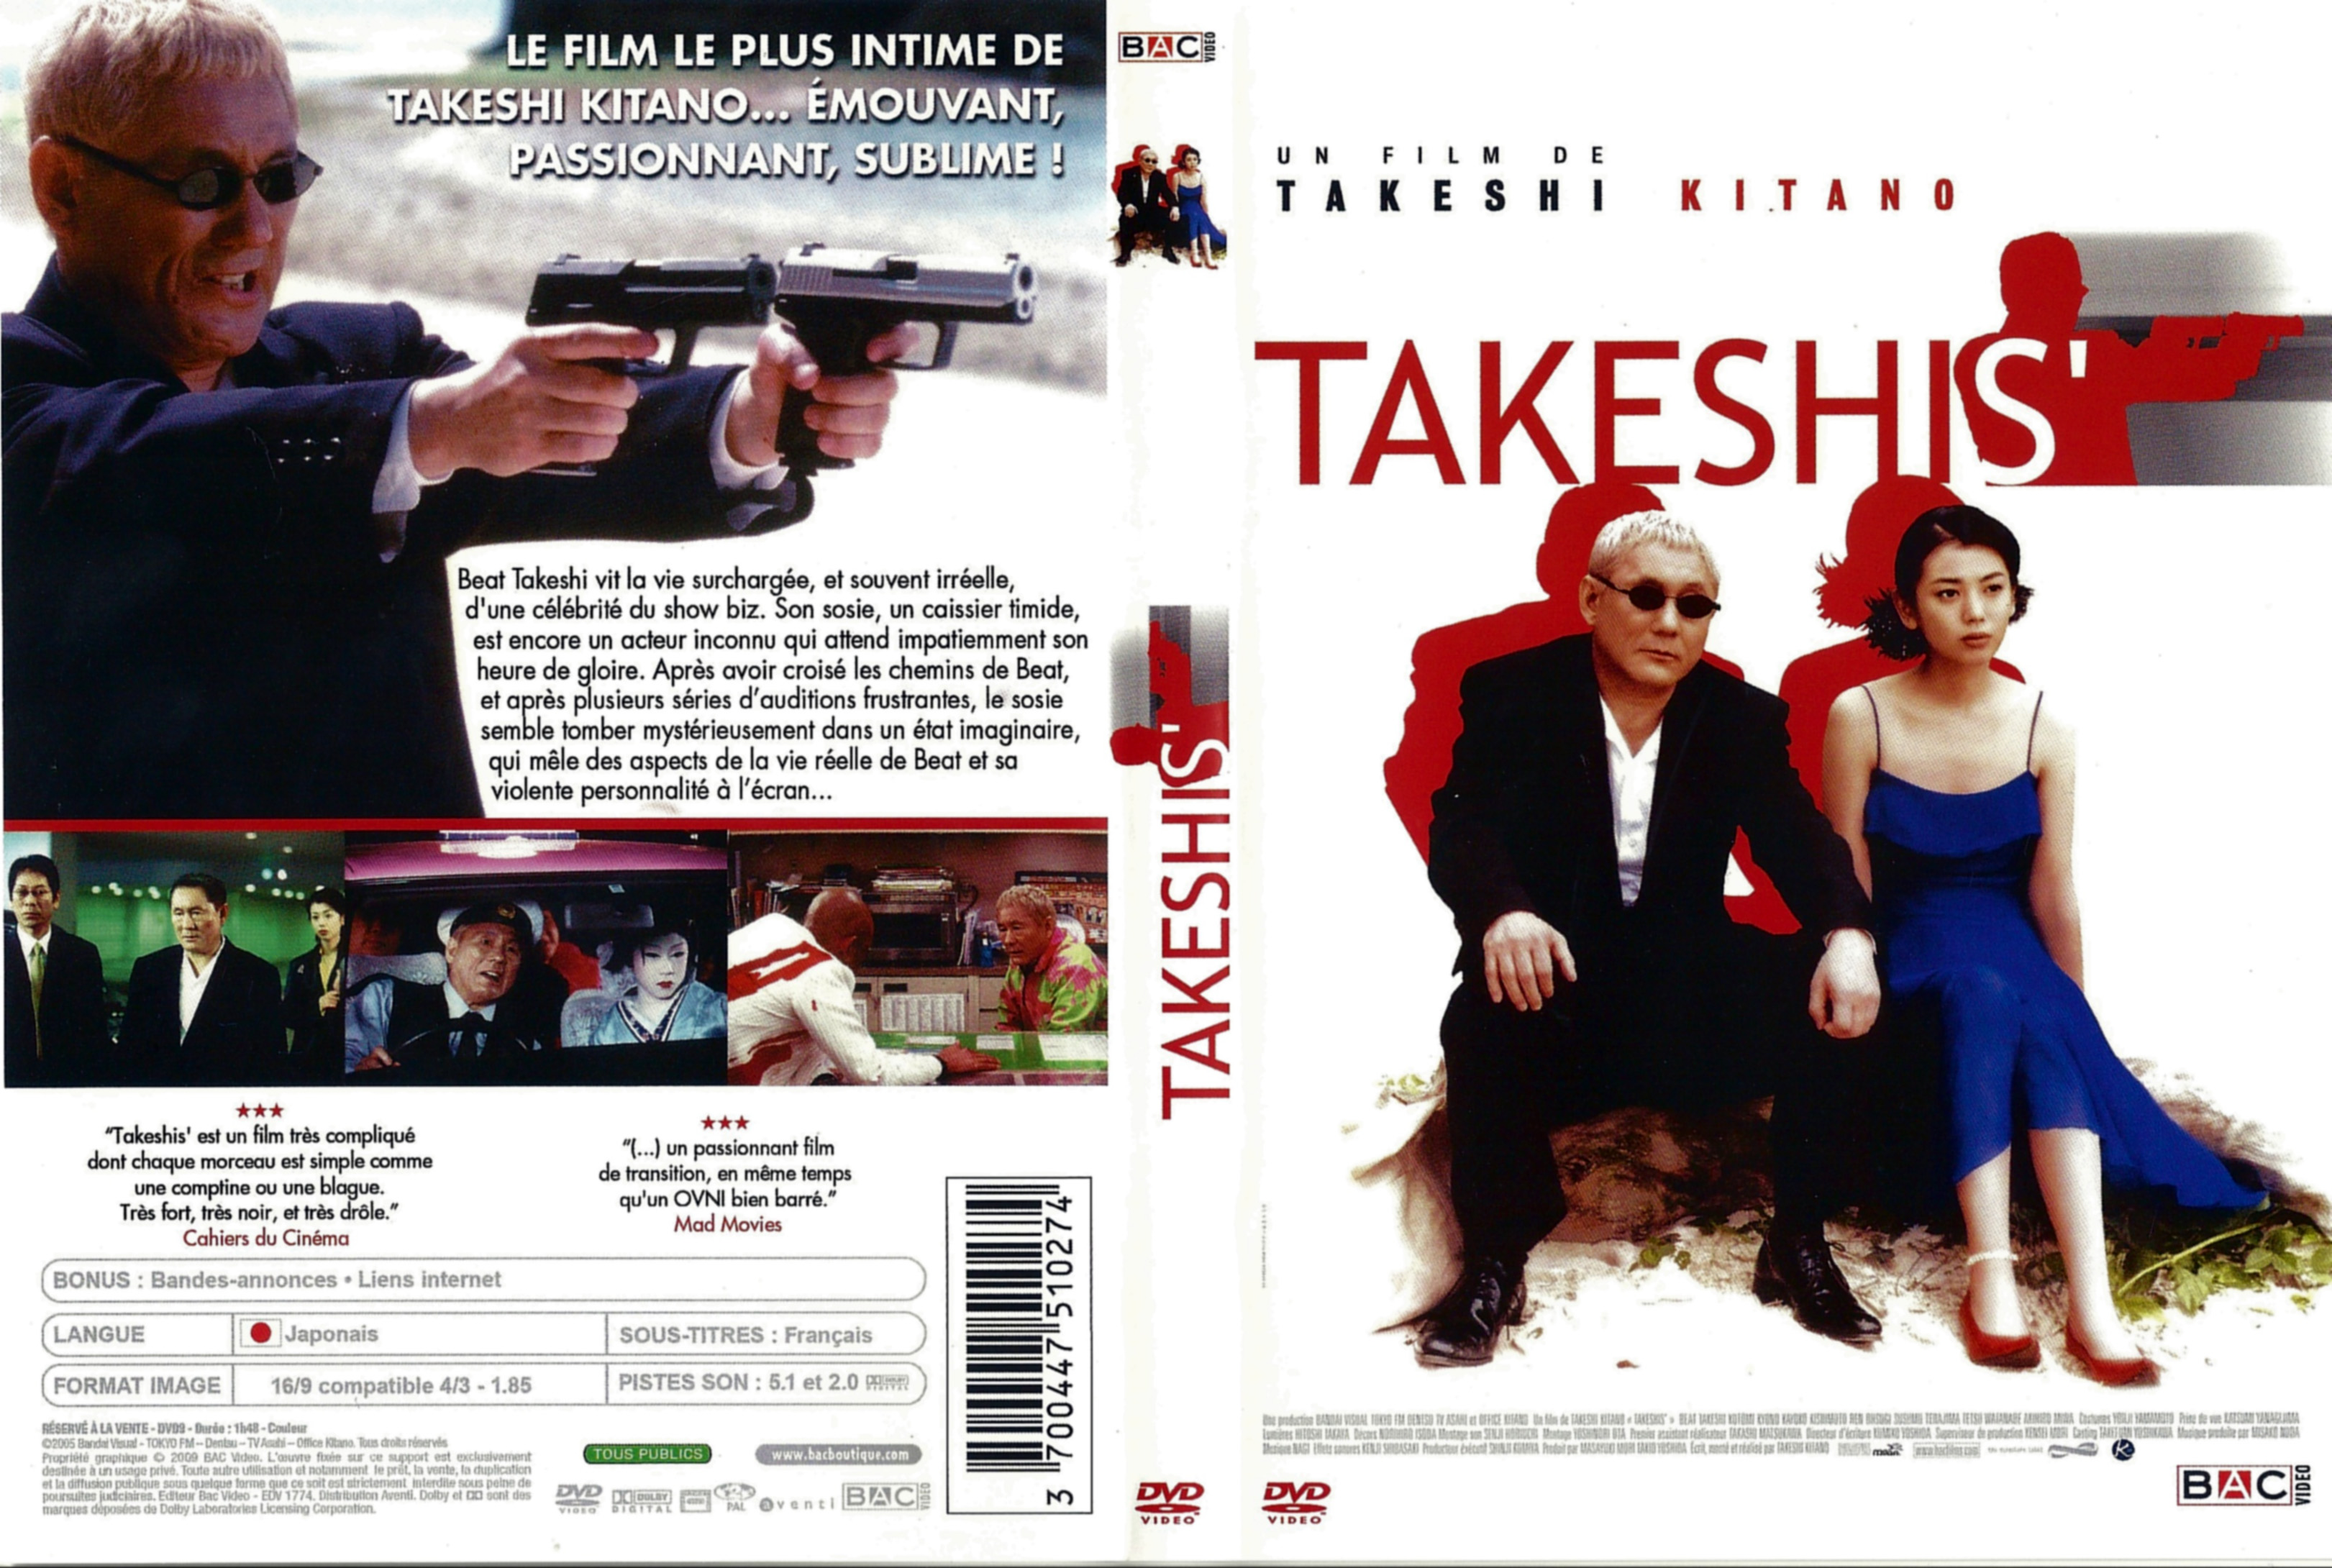 Jaquette DVD Takeshi